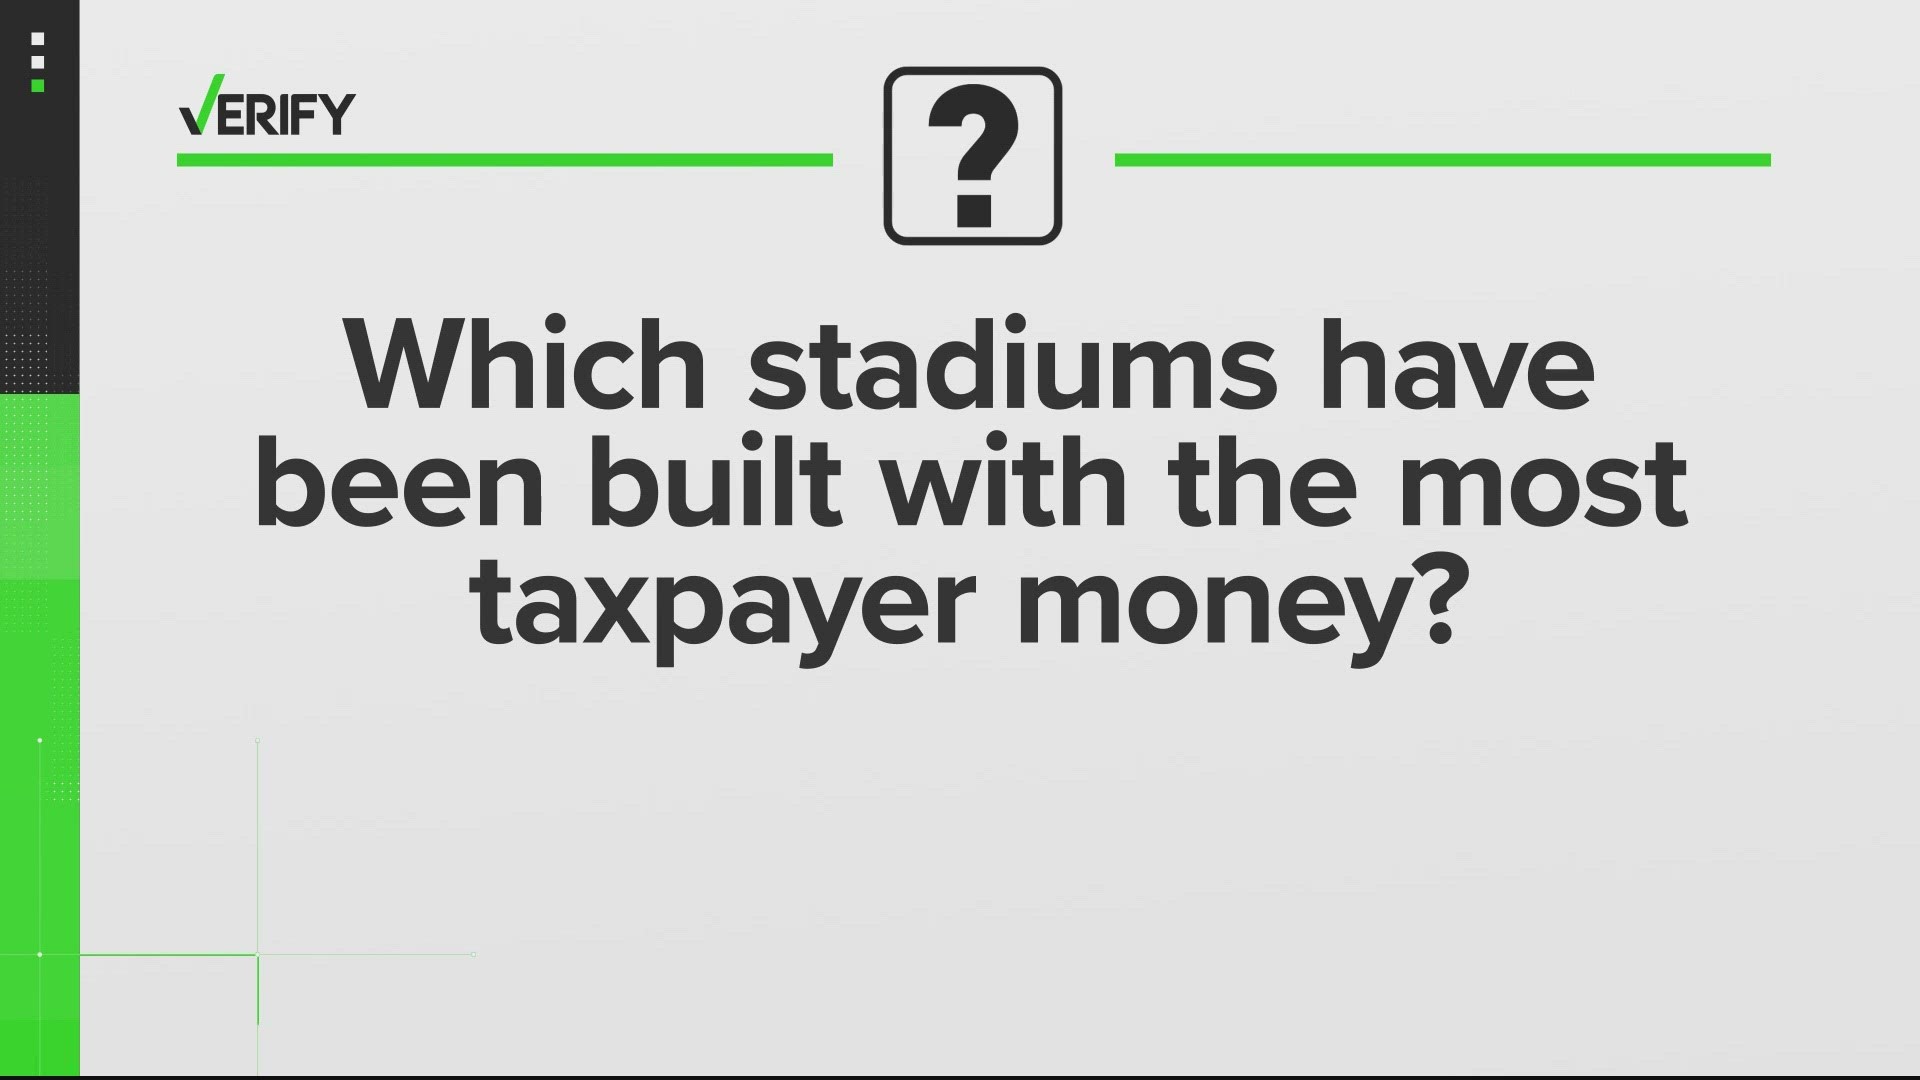 Based on ESPN reporting, the new ownership group predicts $1.5B in incentives to build a new stadium in Virginia. That would be more than any other team received.